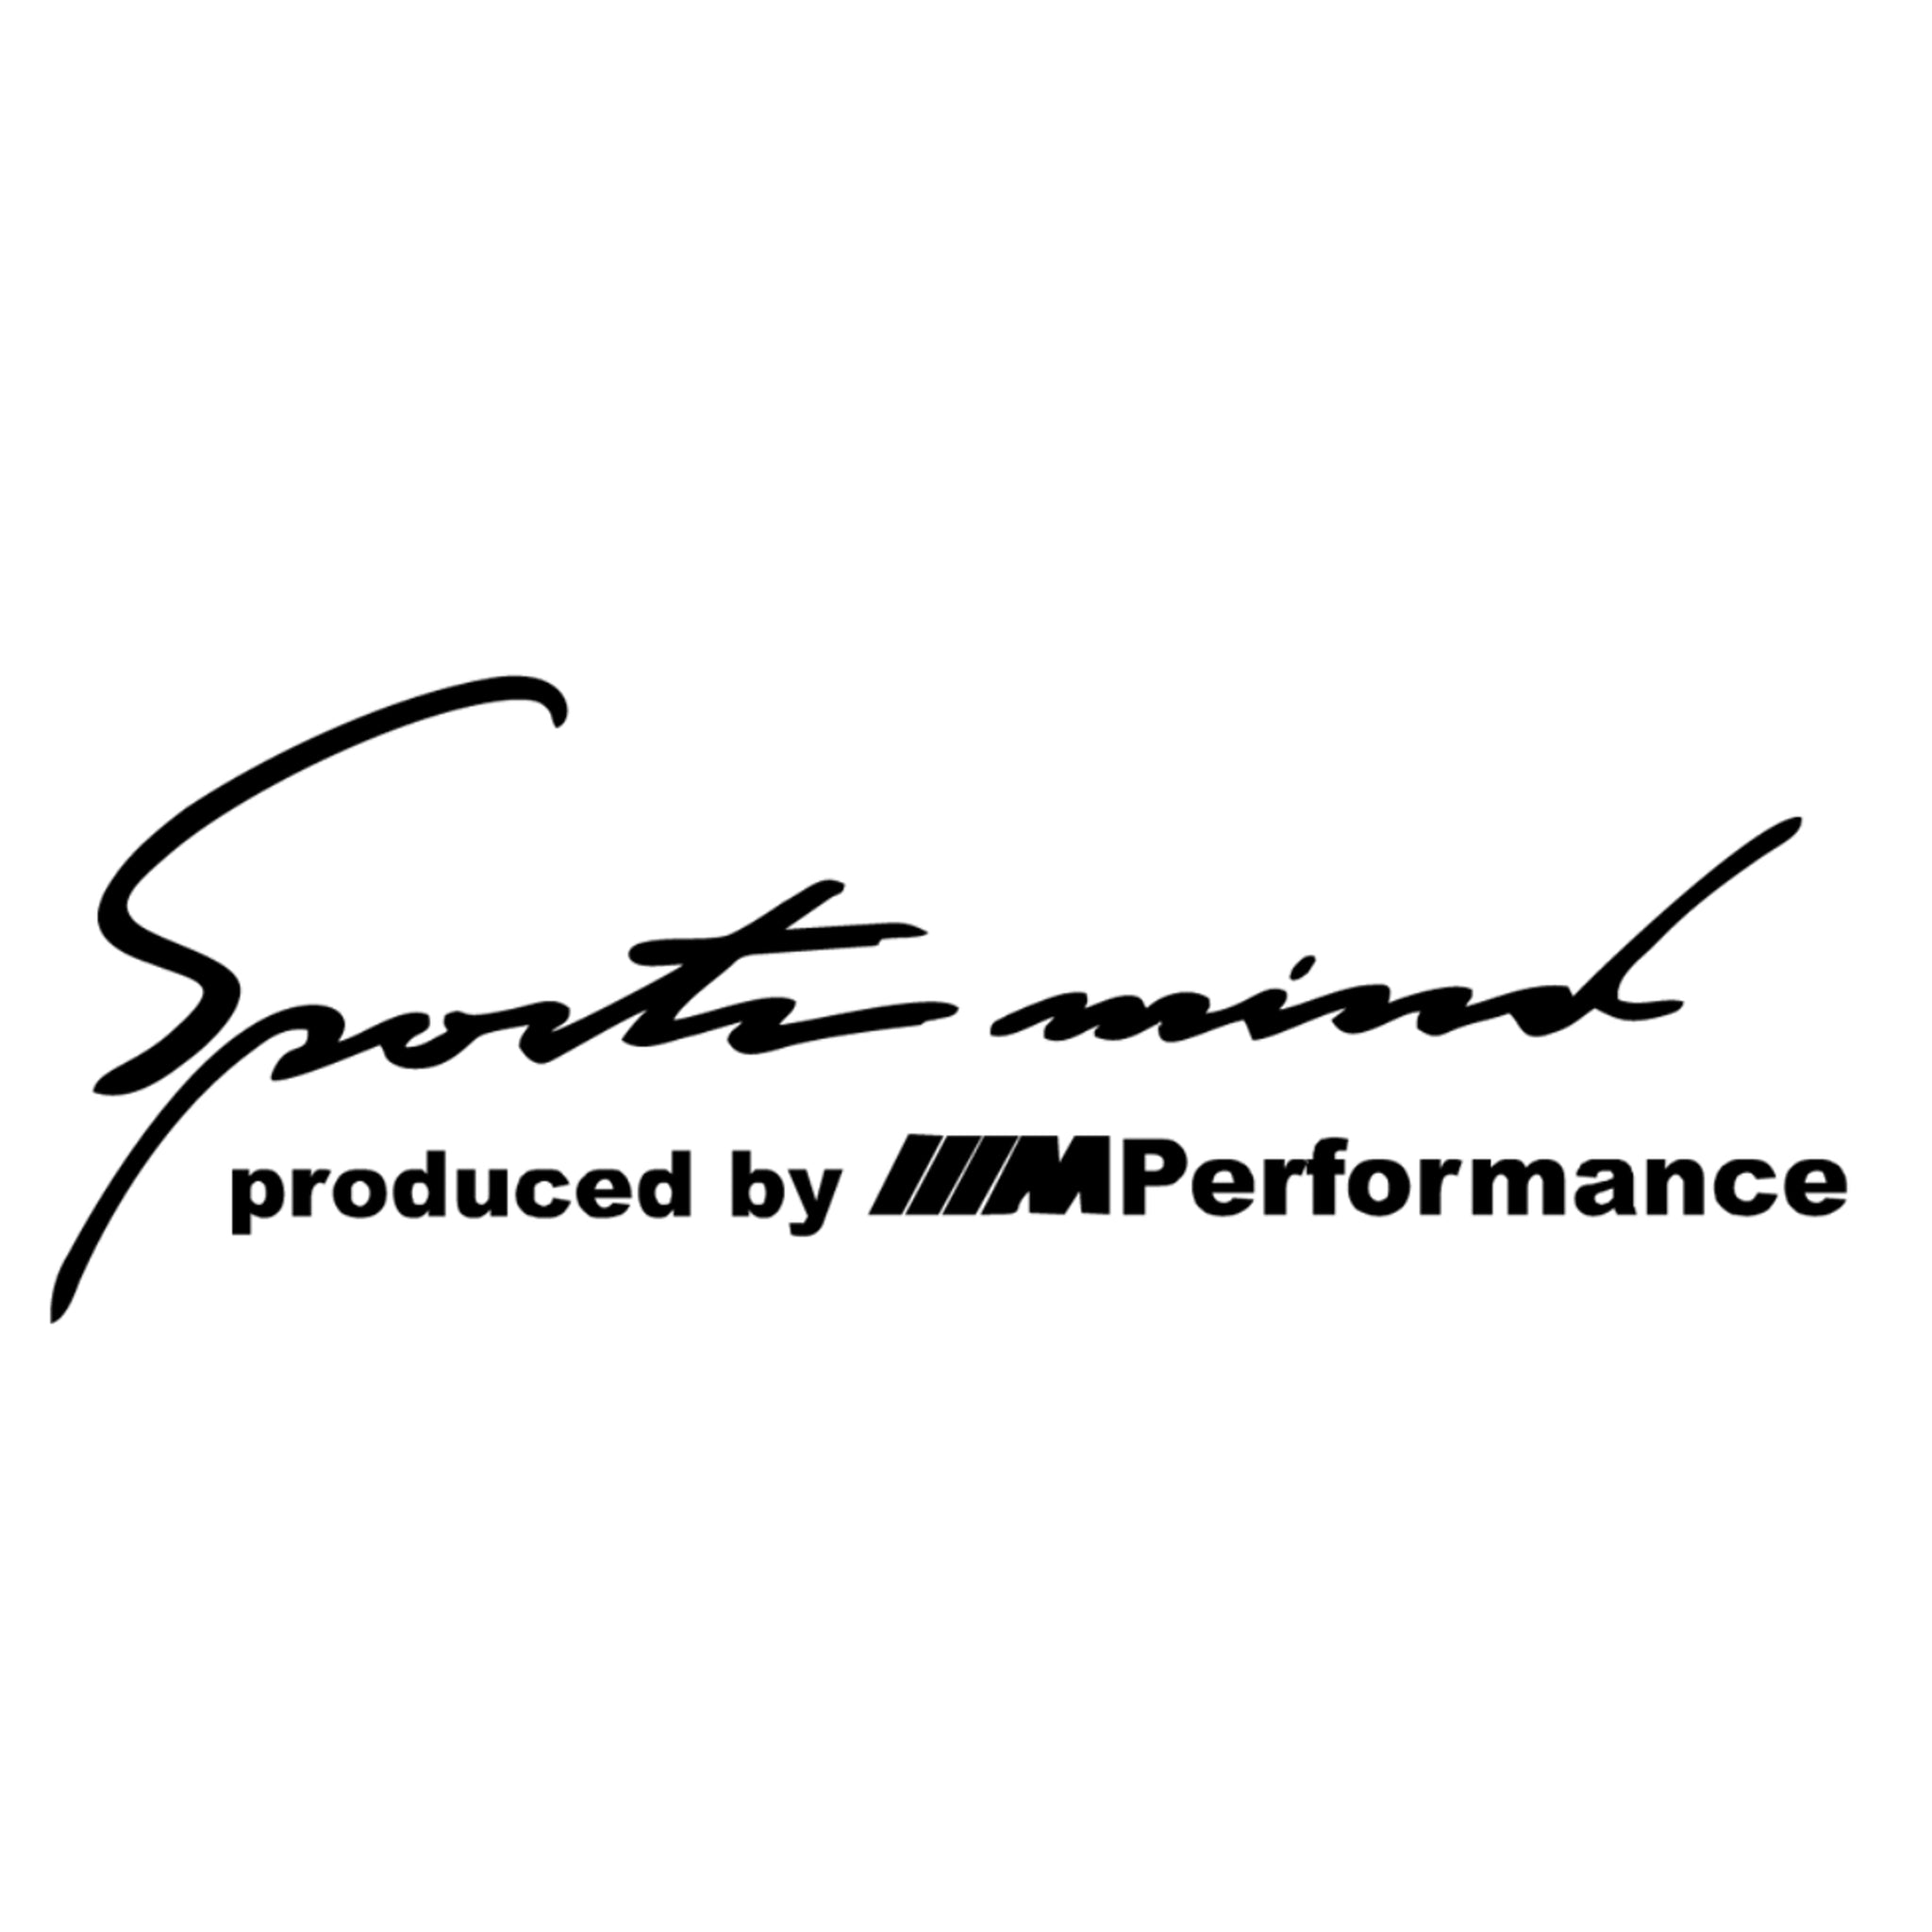 Sticker Sport Mind Produced by M Performance